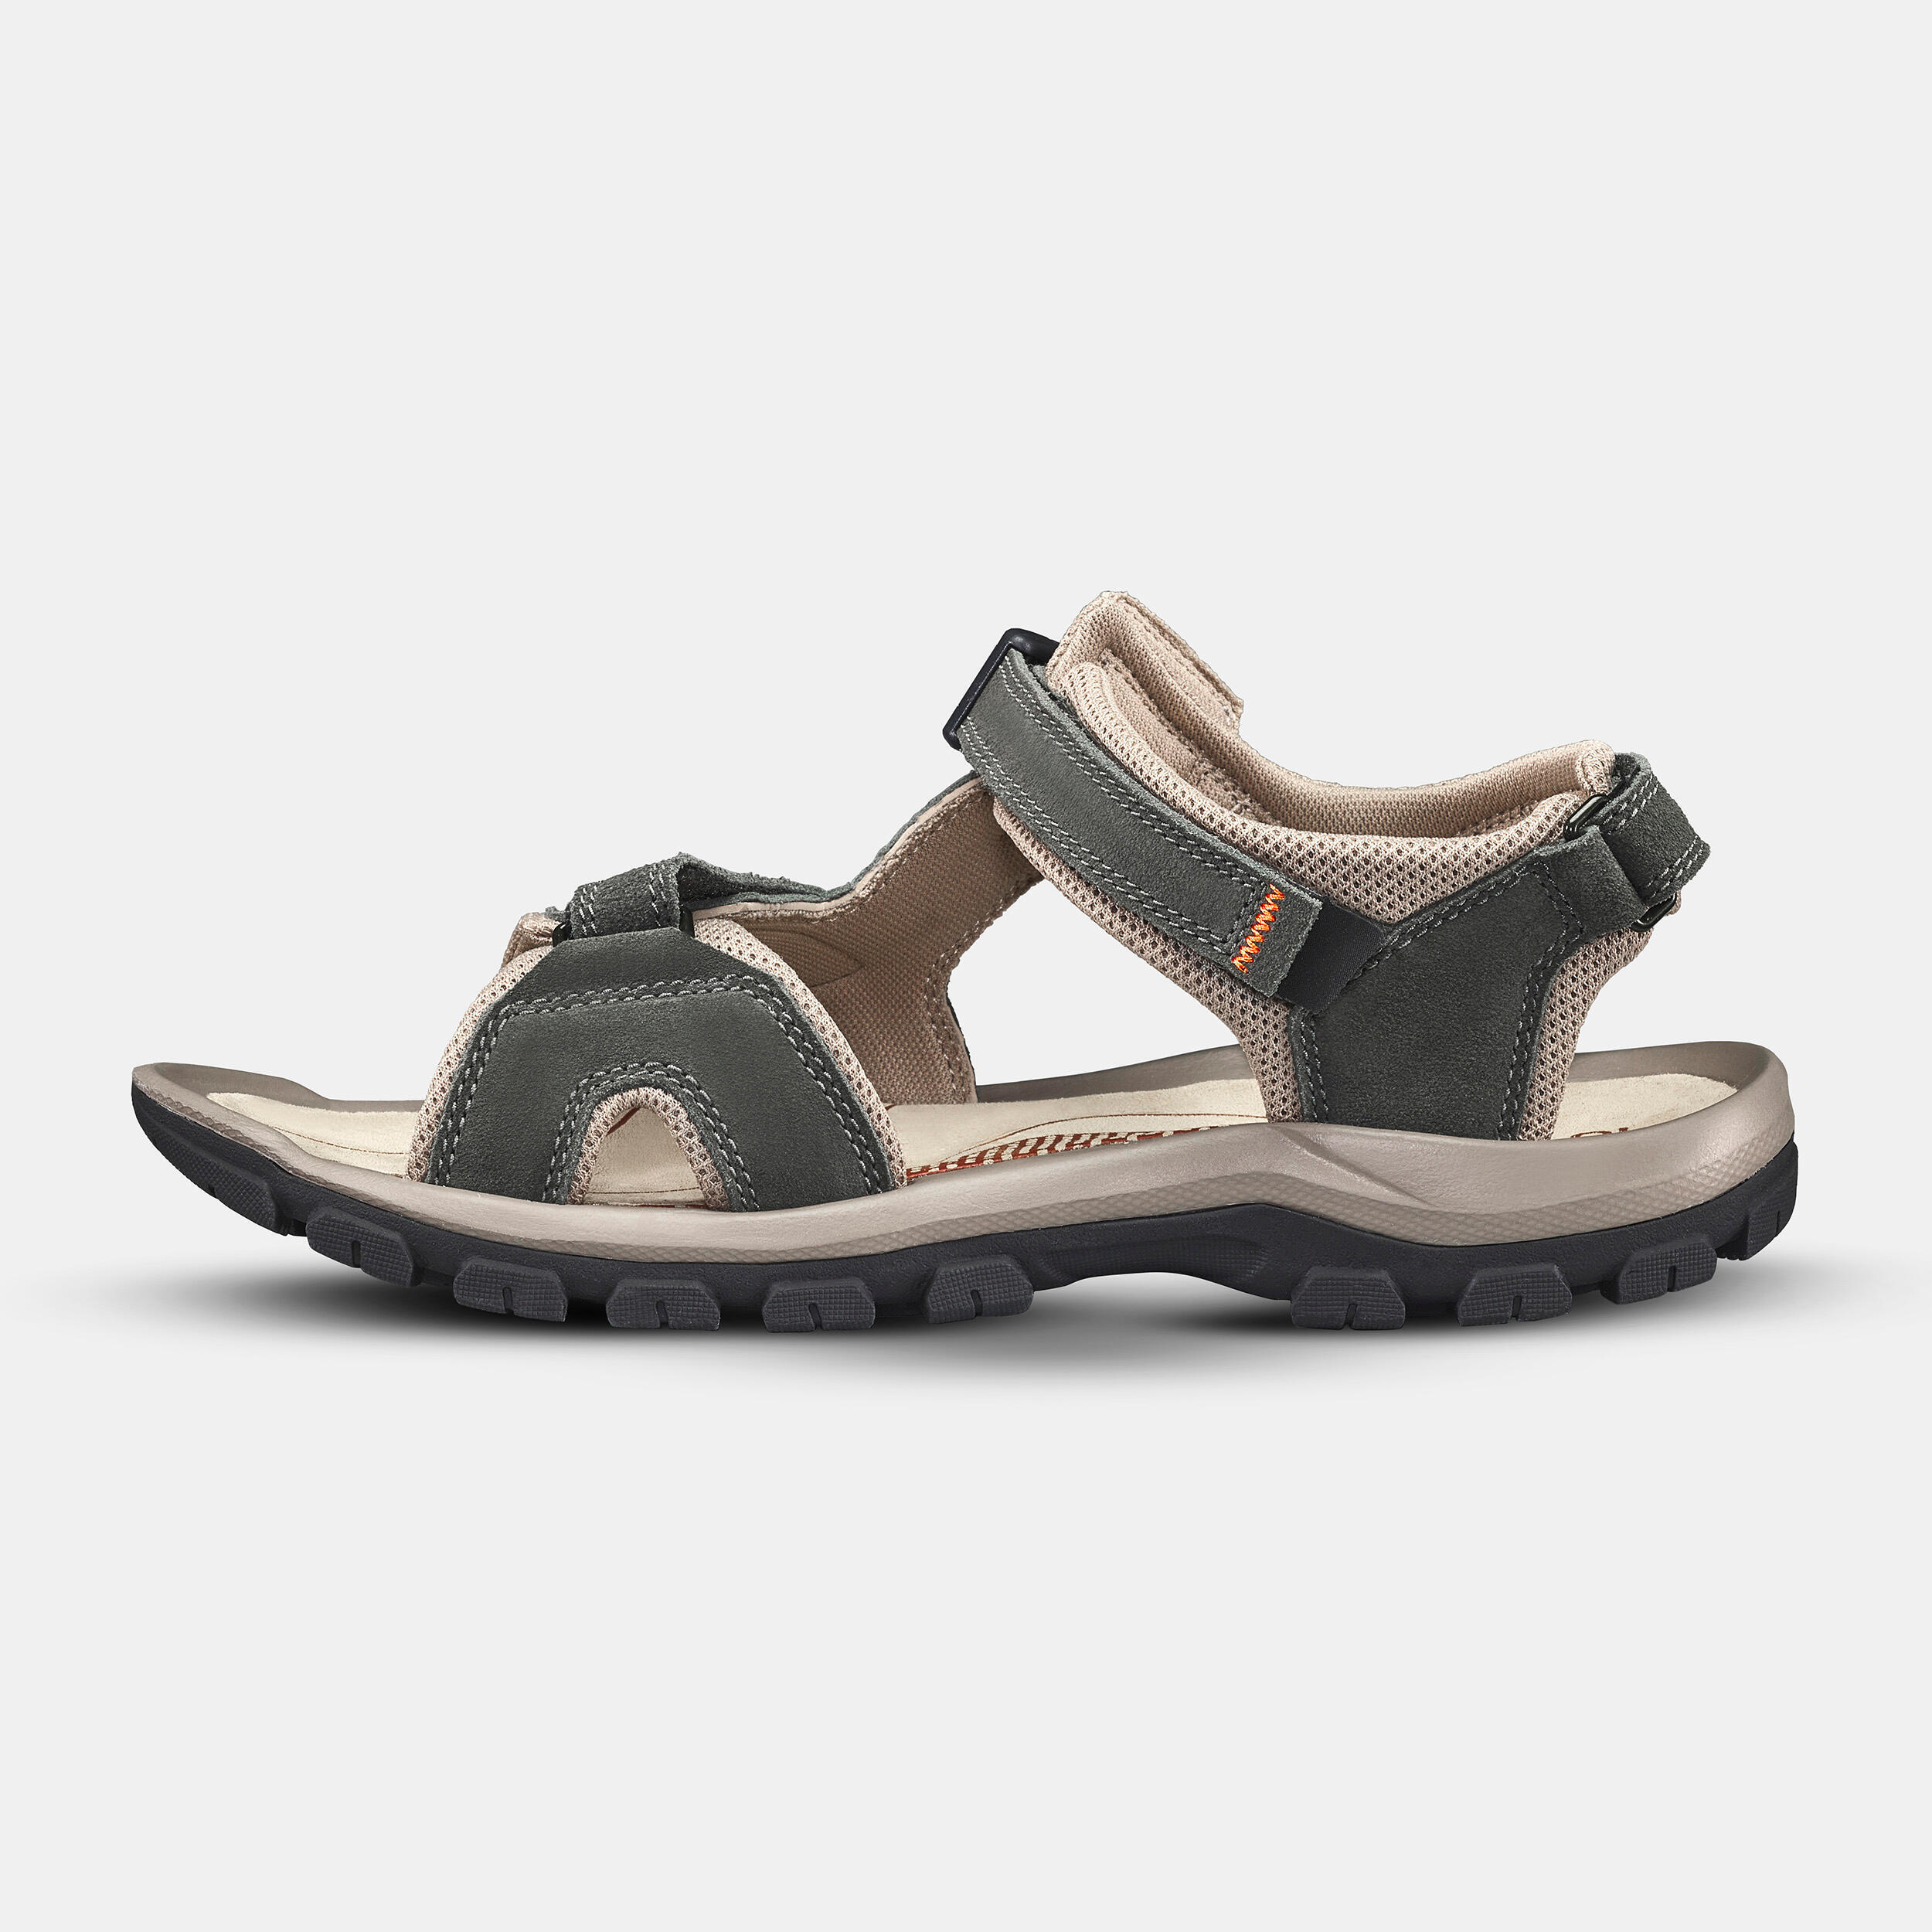 Men's Leather Hiking Sandals NH500 2/9